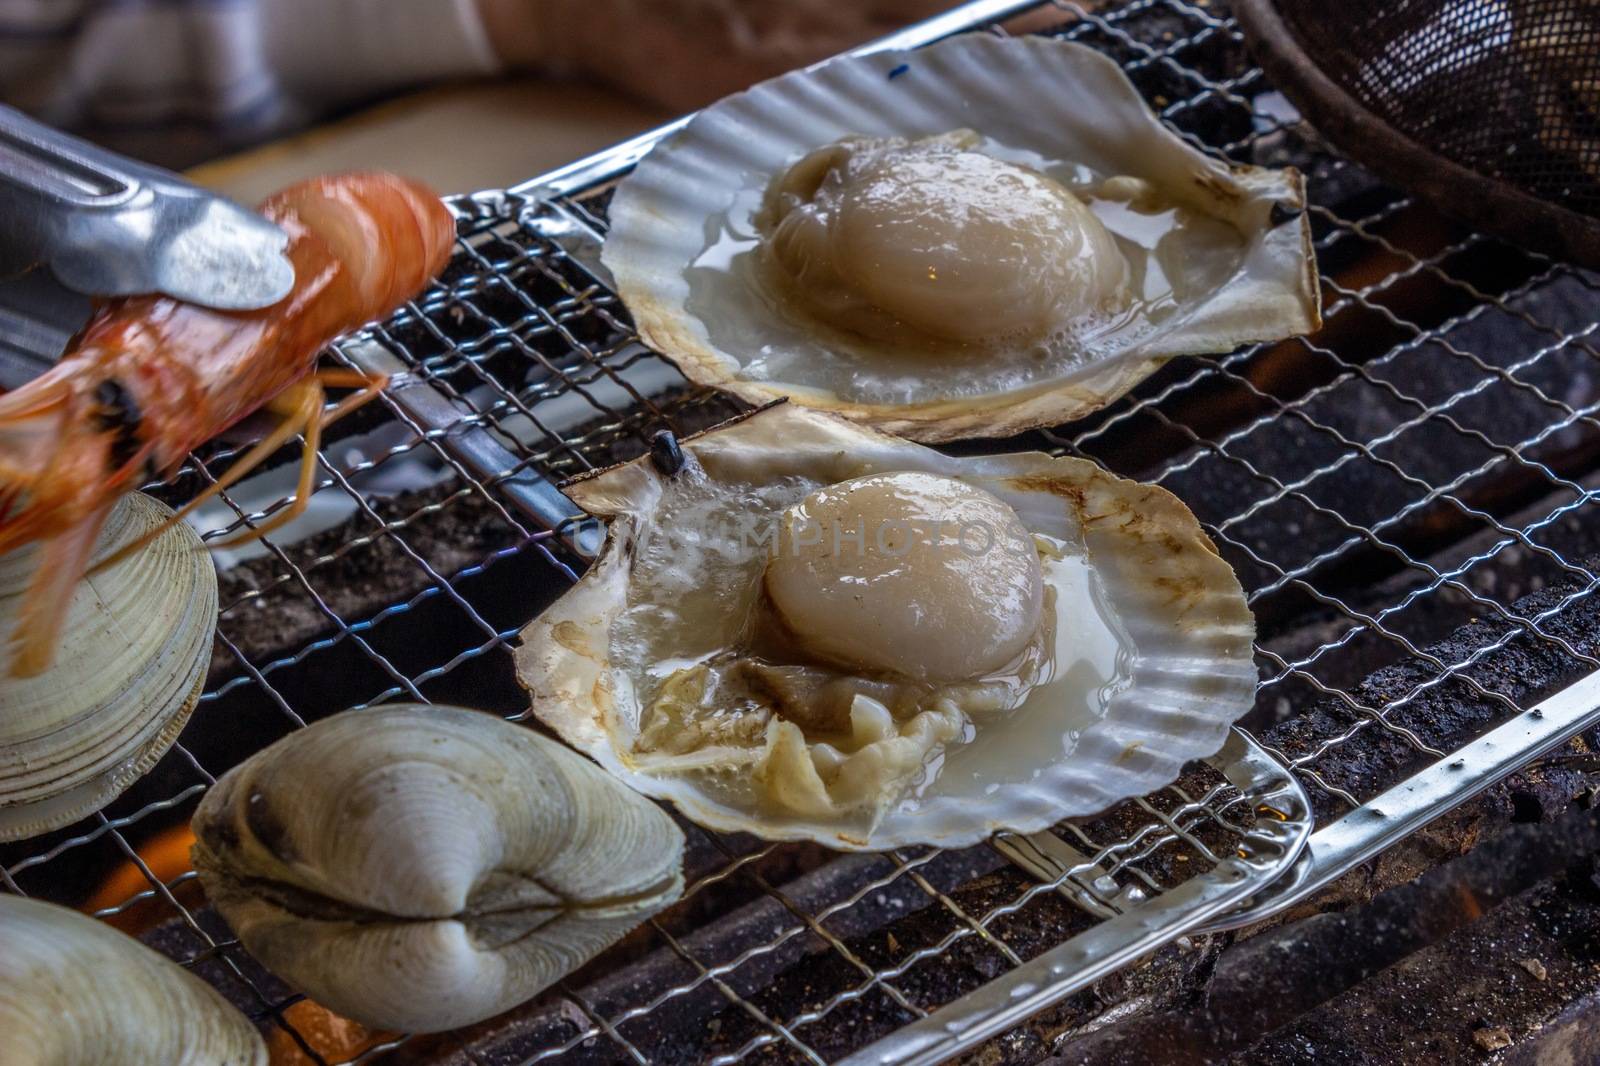 Clam,Quahog,shrimp,scallop shell,Charcoal-grilled seafood.in chiba-ken JAPAN by Umbrella